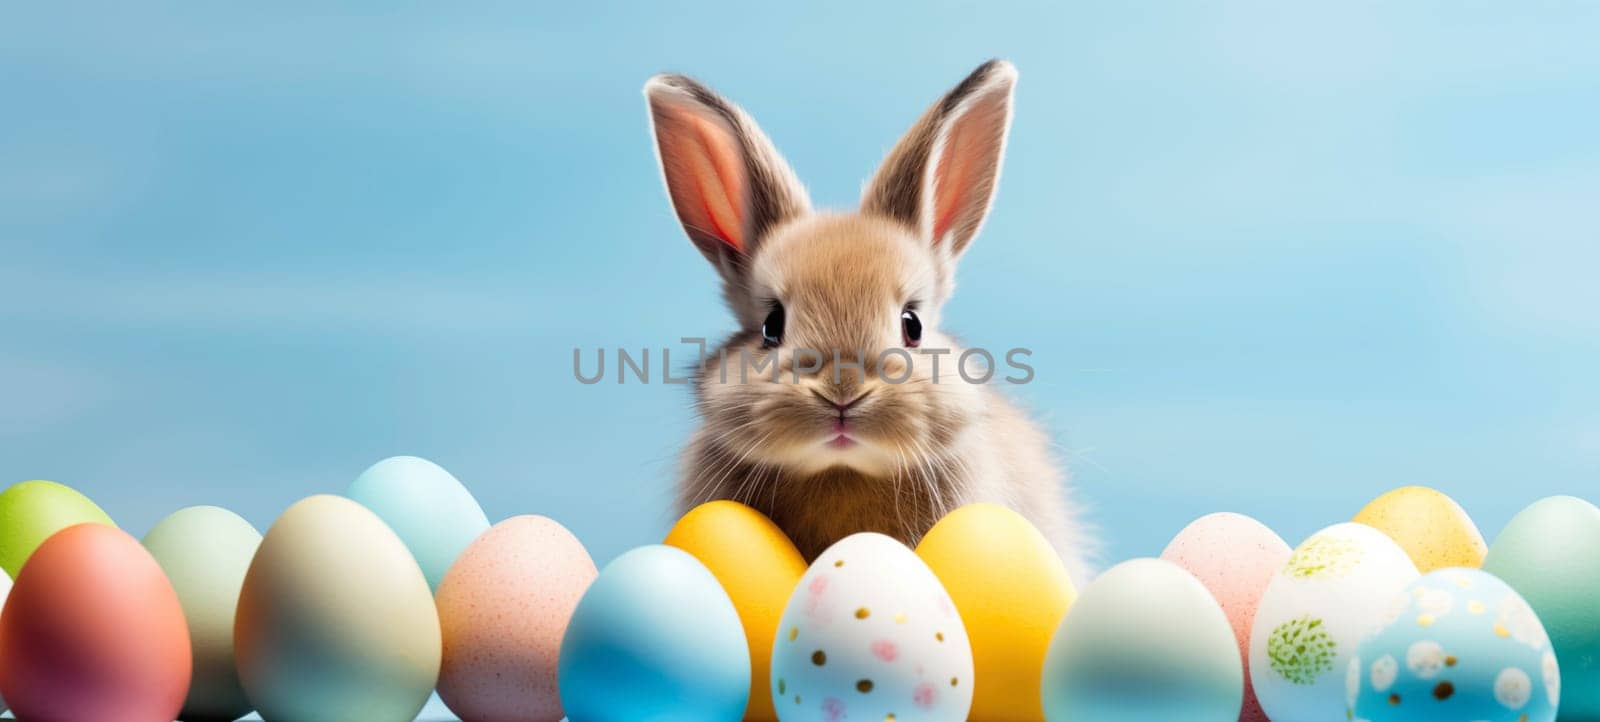 Adorable brown bunny peeking over a row of pastel-colored Easter eggs against a clear blue sky, perfect for festive springtime celebrations.